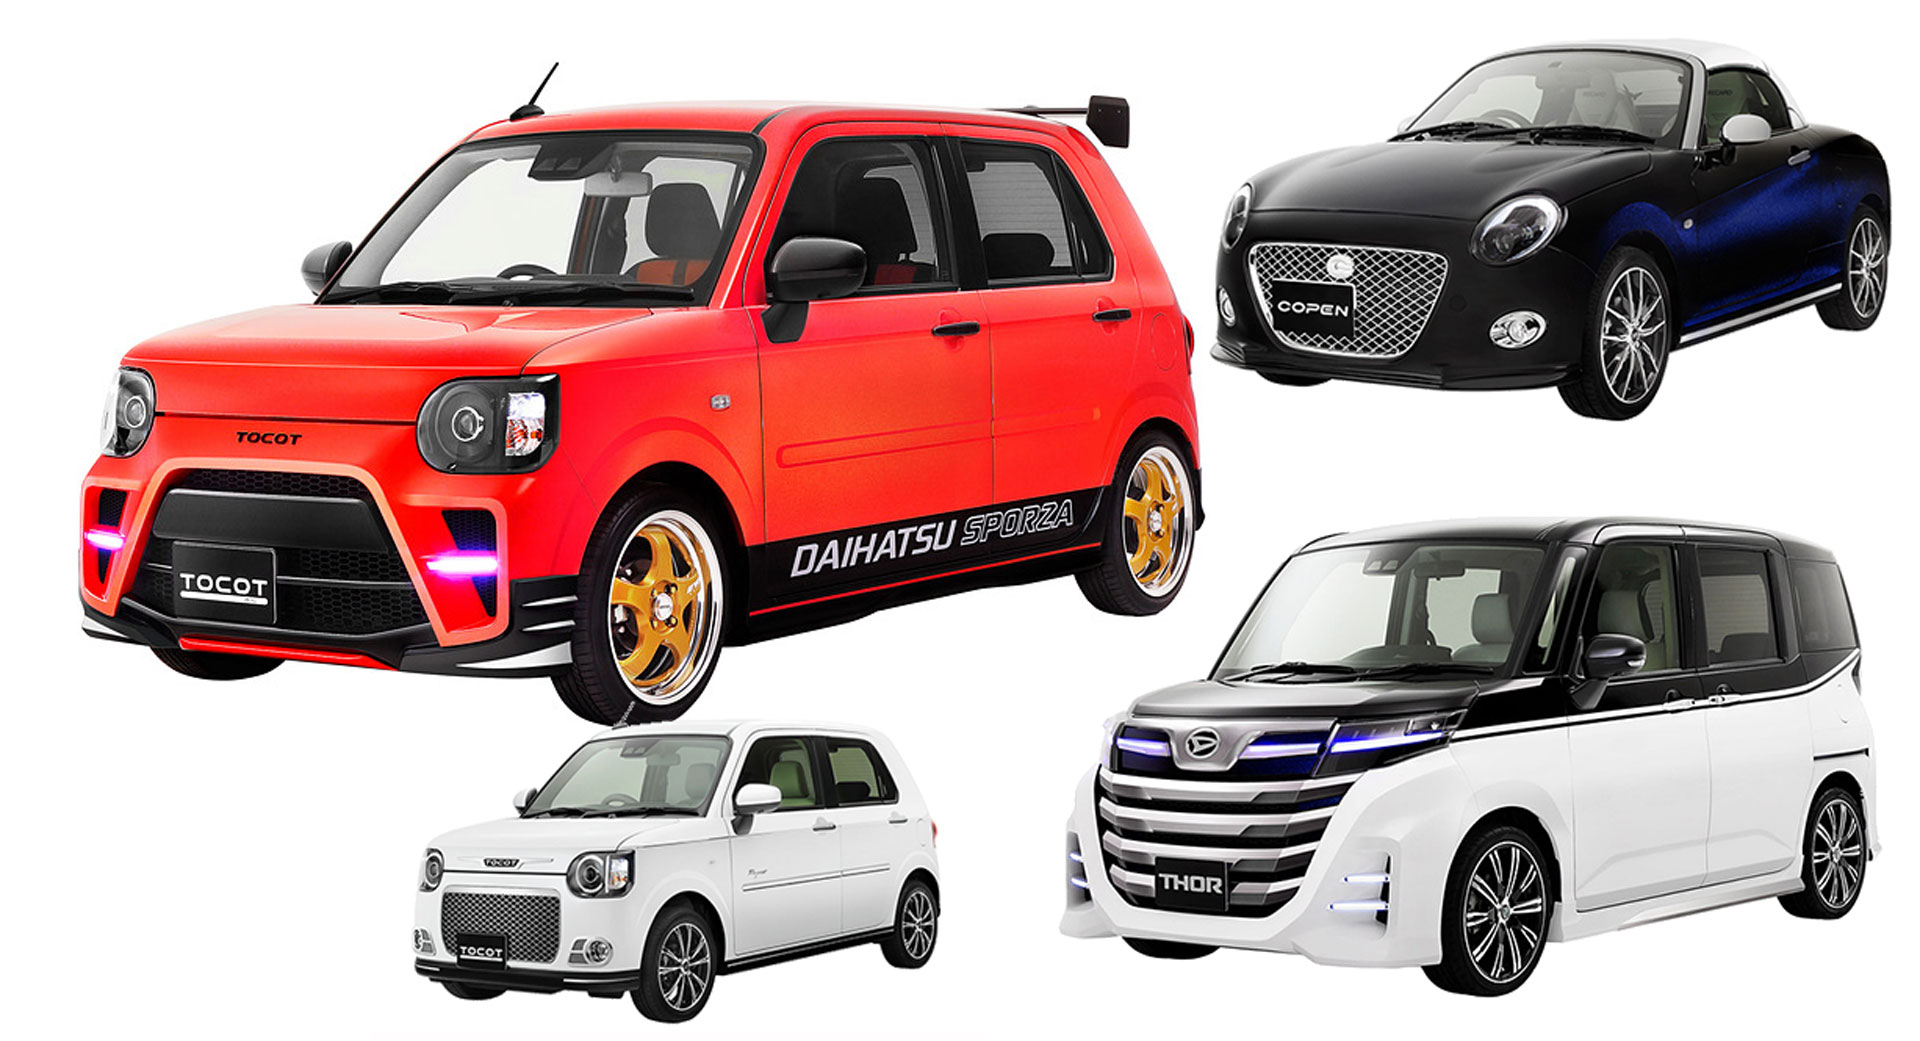 What are kei cars